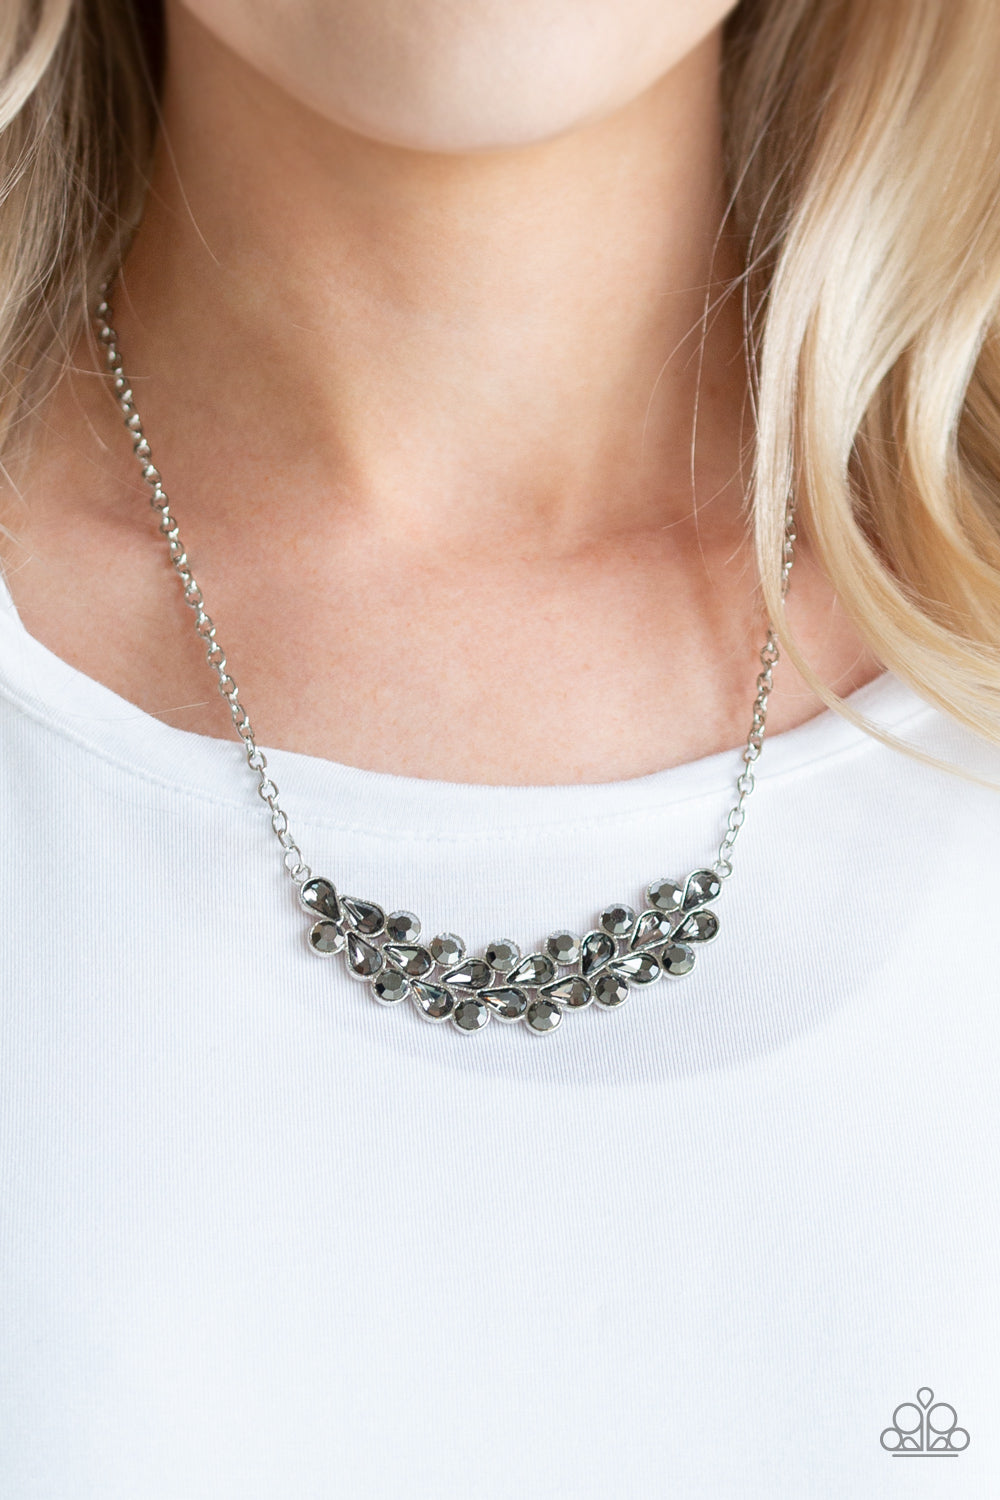 Special Treatment - Silver Paparazzi Necklace